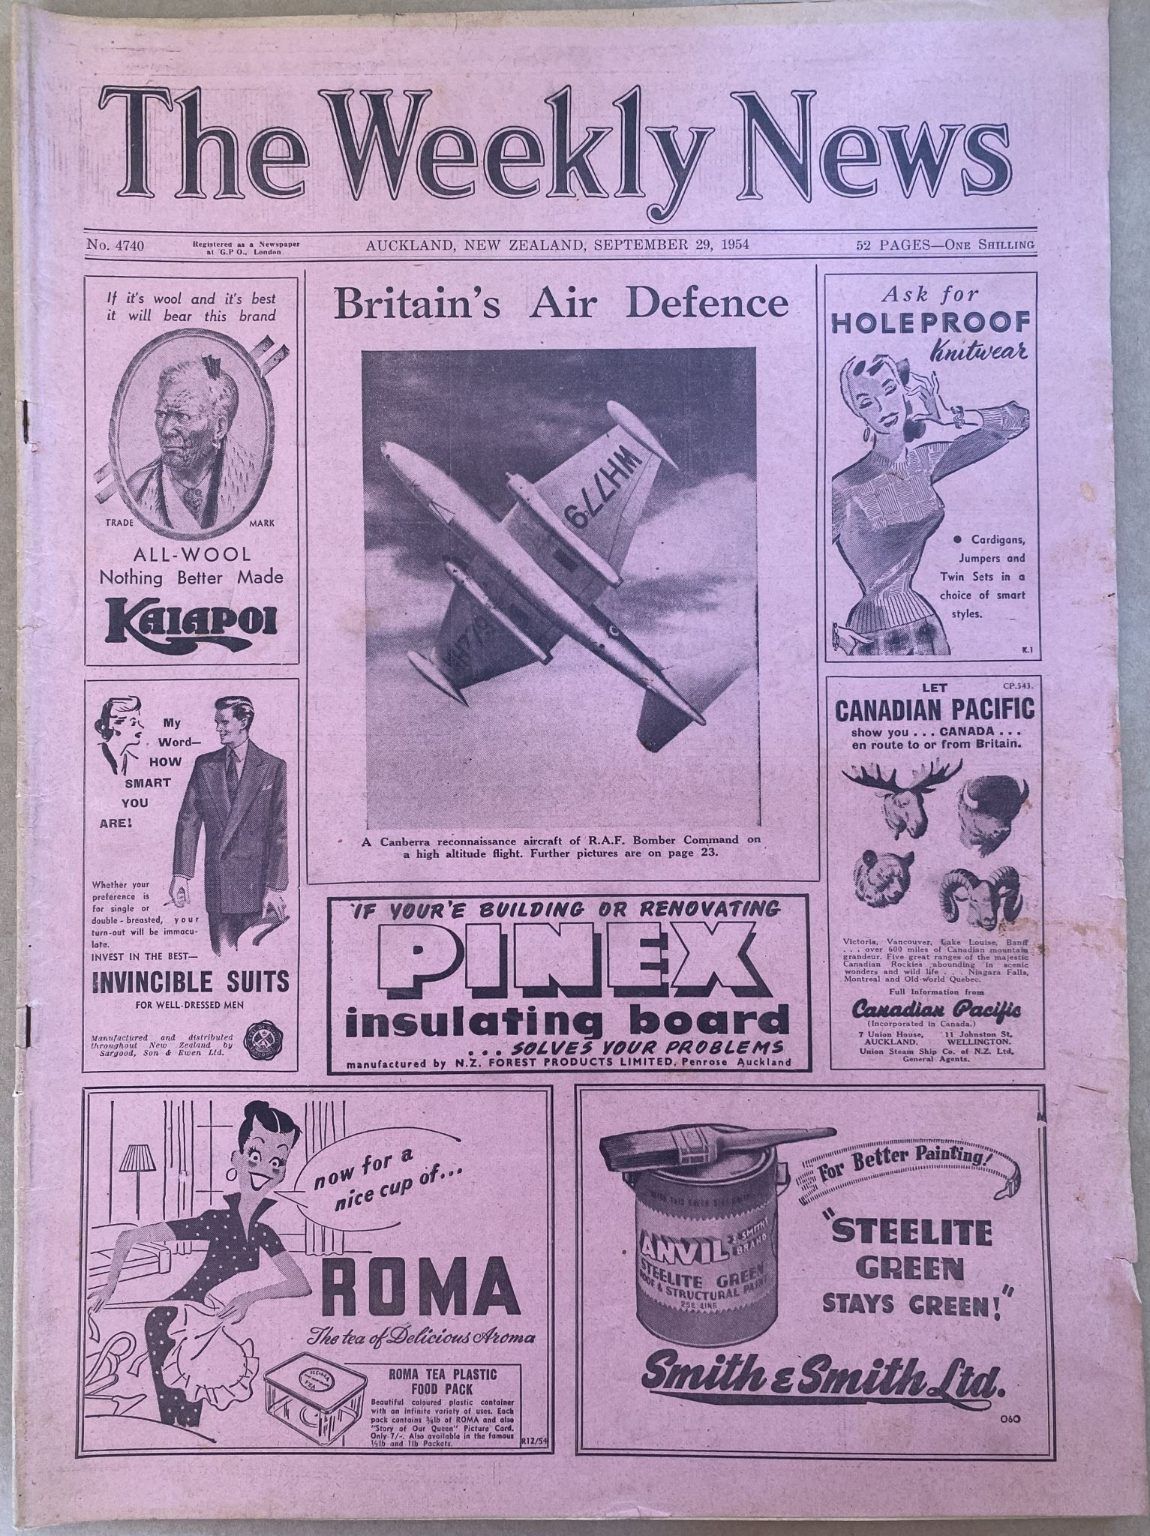 OLD NEWSPAPER: The Weekly News - No. 4740, 29 September 1954